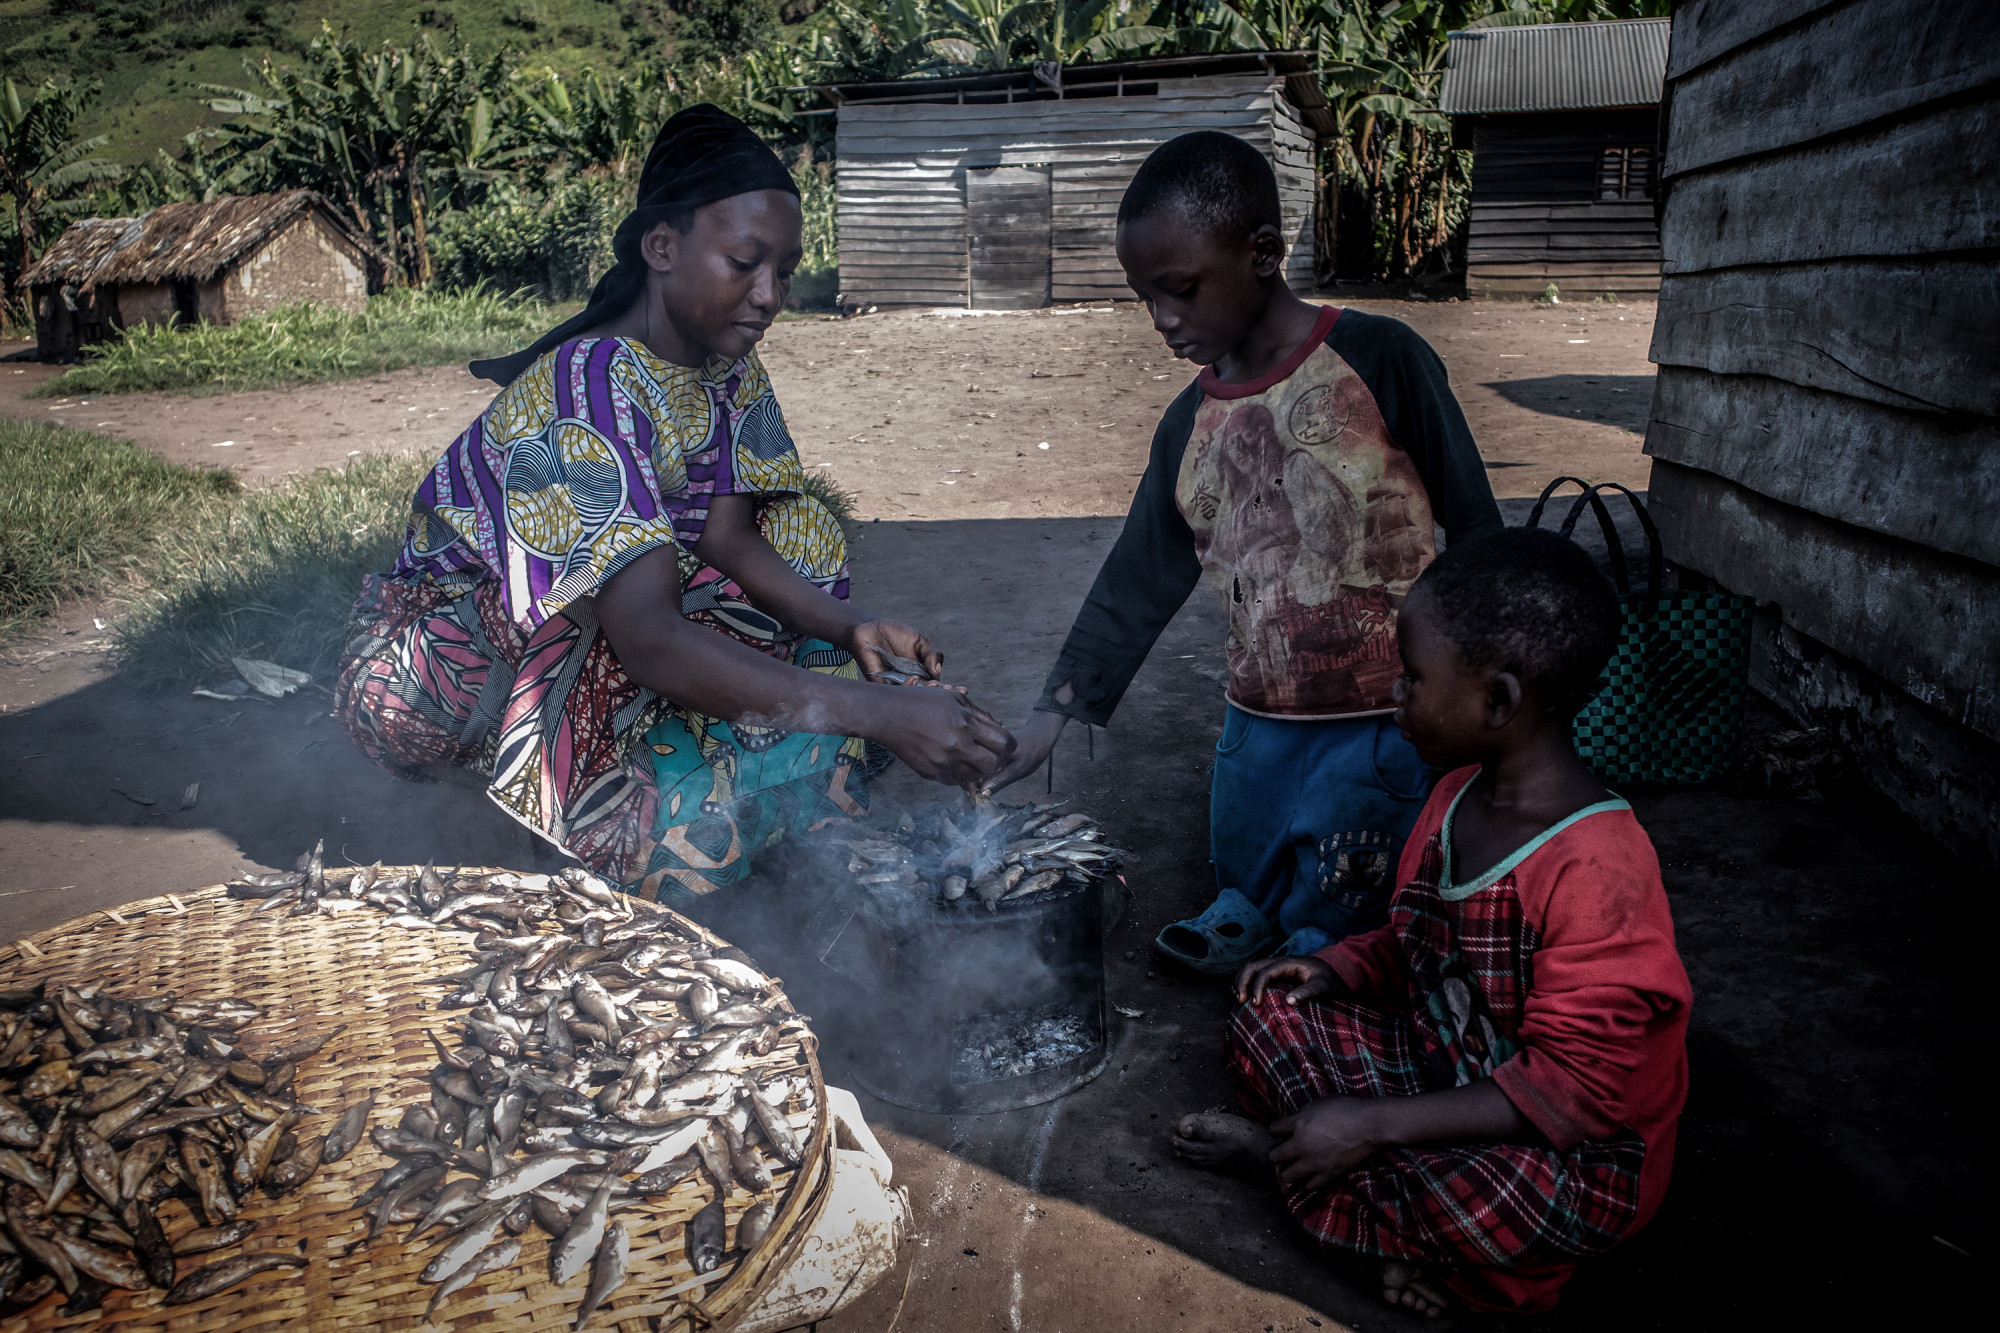 Minova, DRC, December 2020. A woman prepares a meal of Sambaza, or fried fish, on a charcoal stove. © Guerchom Ndebo for Fondation Carmignac